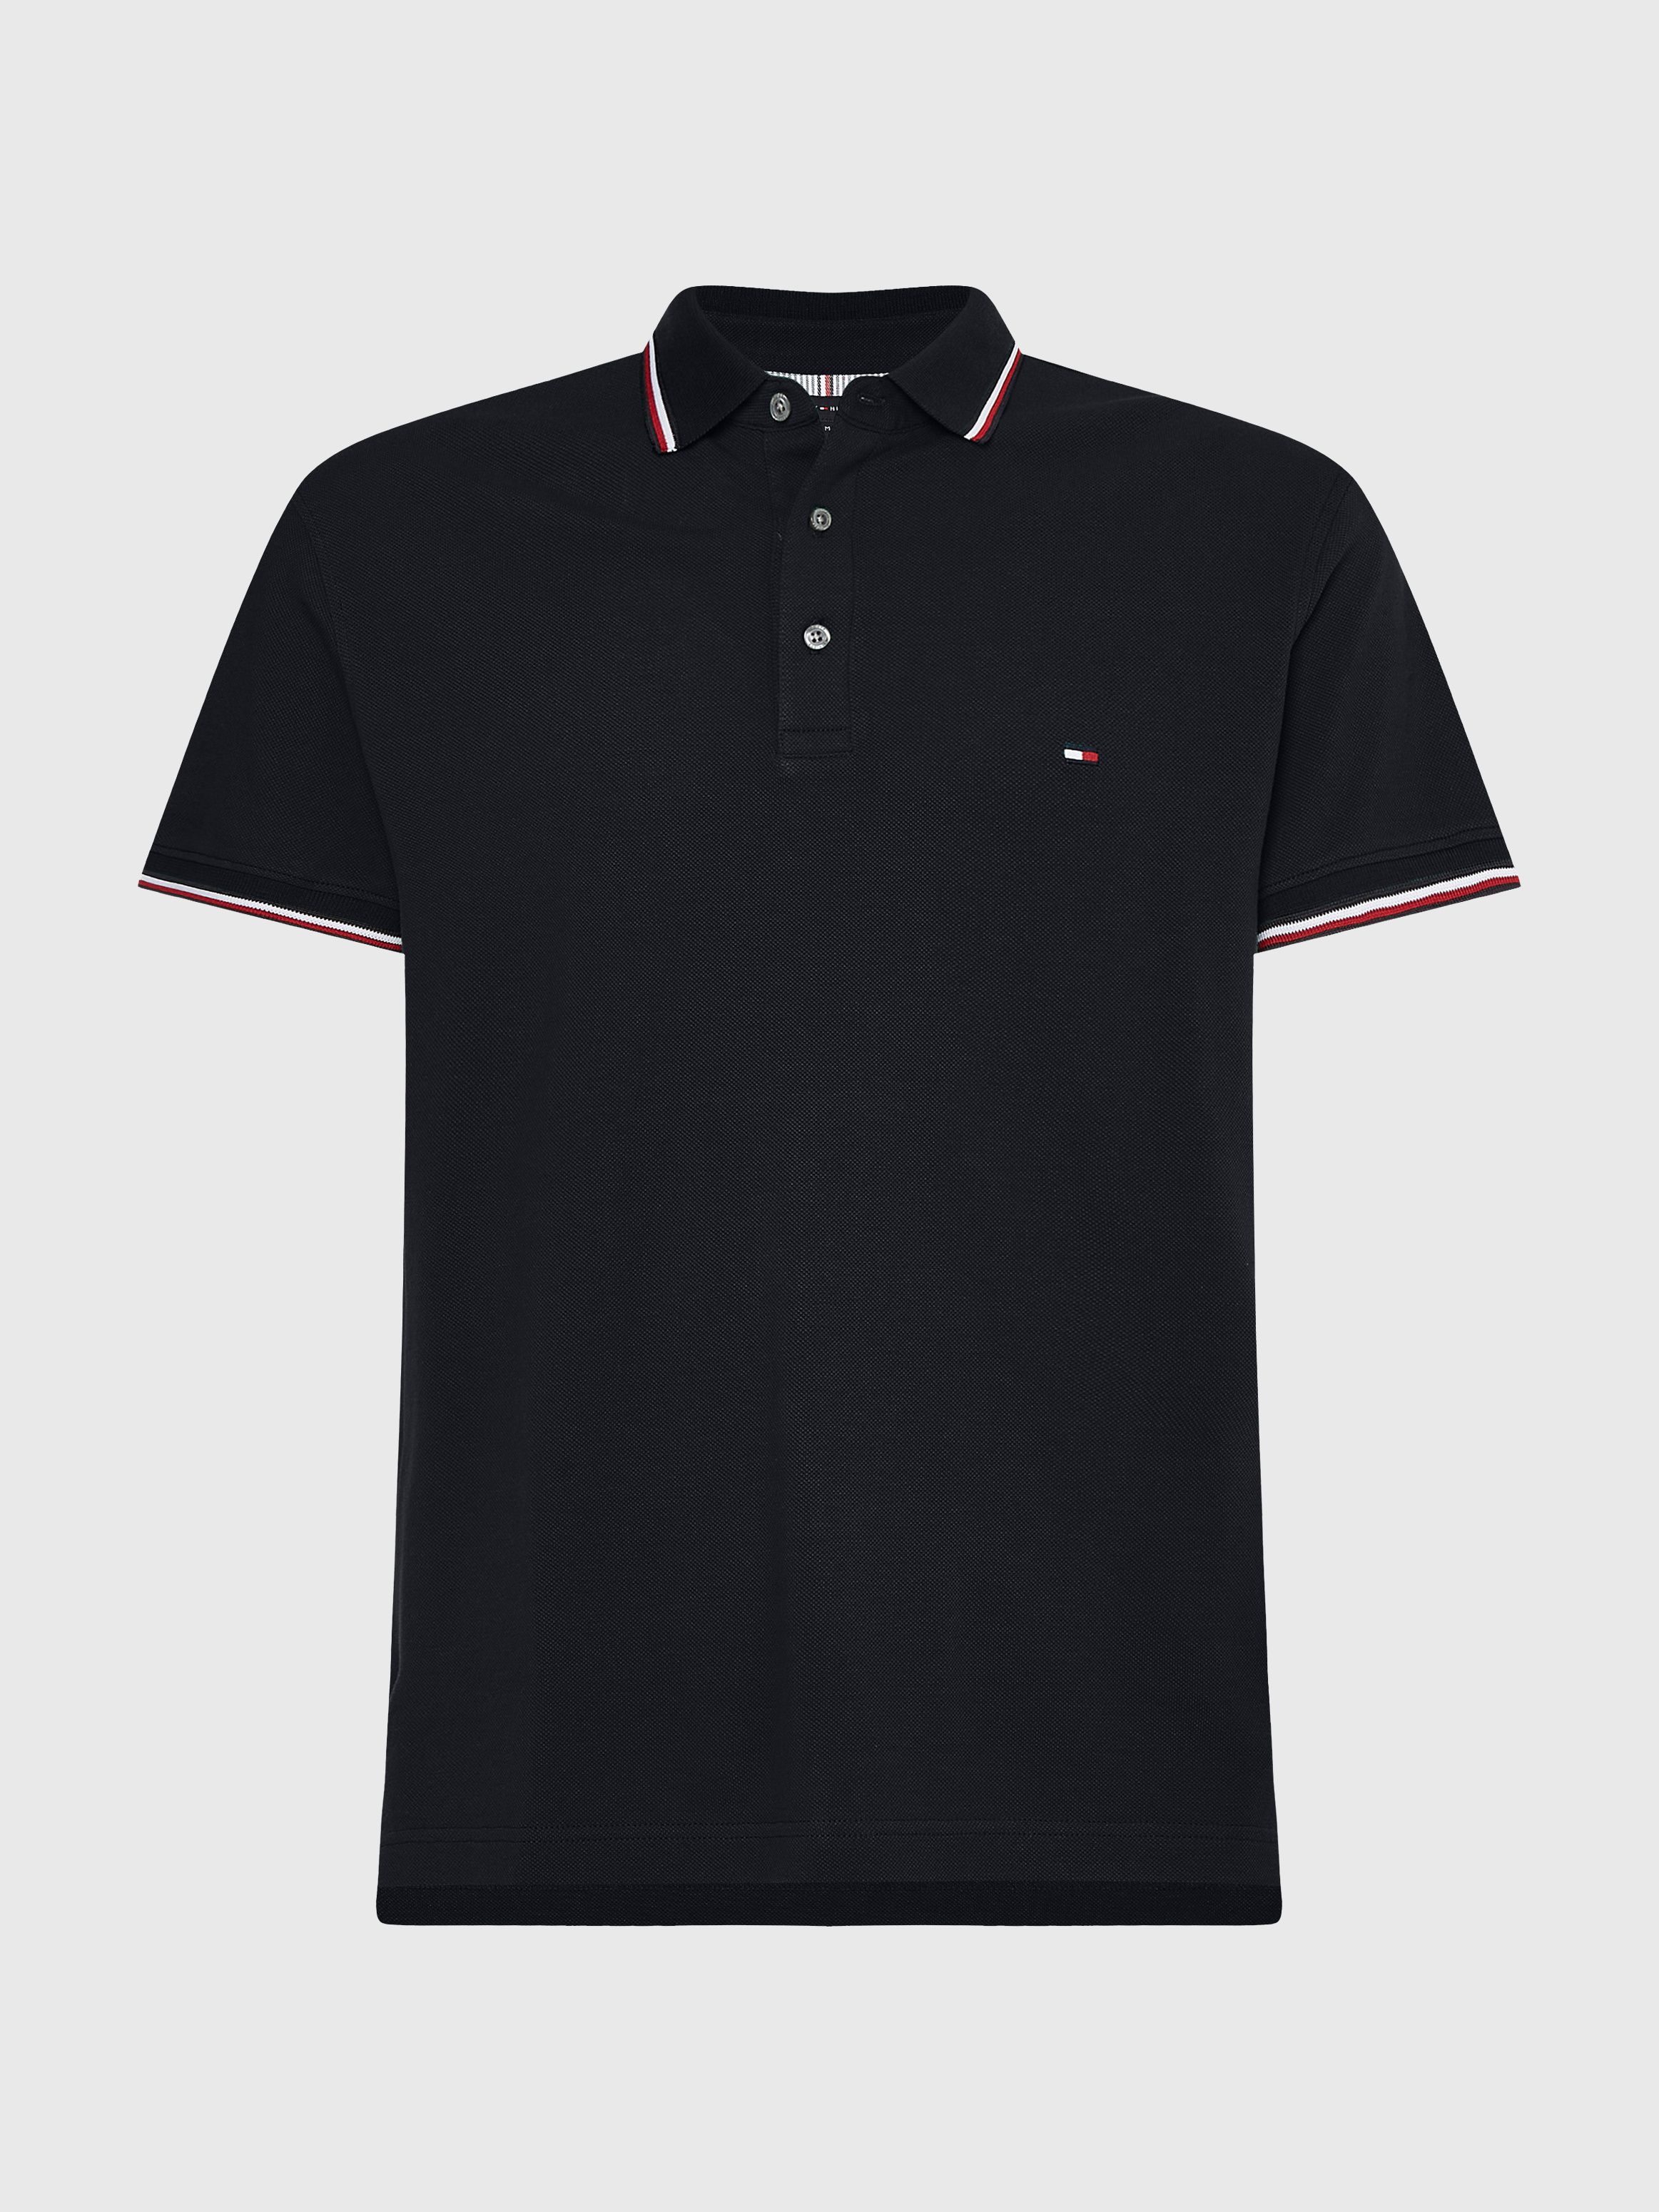 1985 Collection Slim Fit Tipped Polo | Tommy Hilfiger